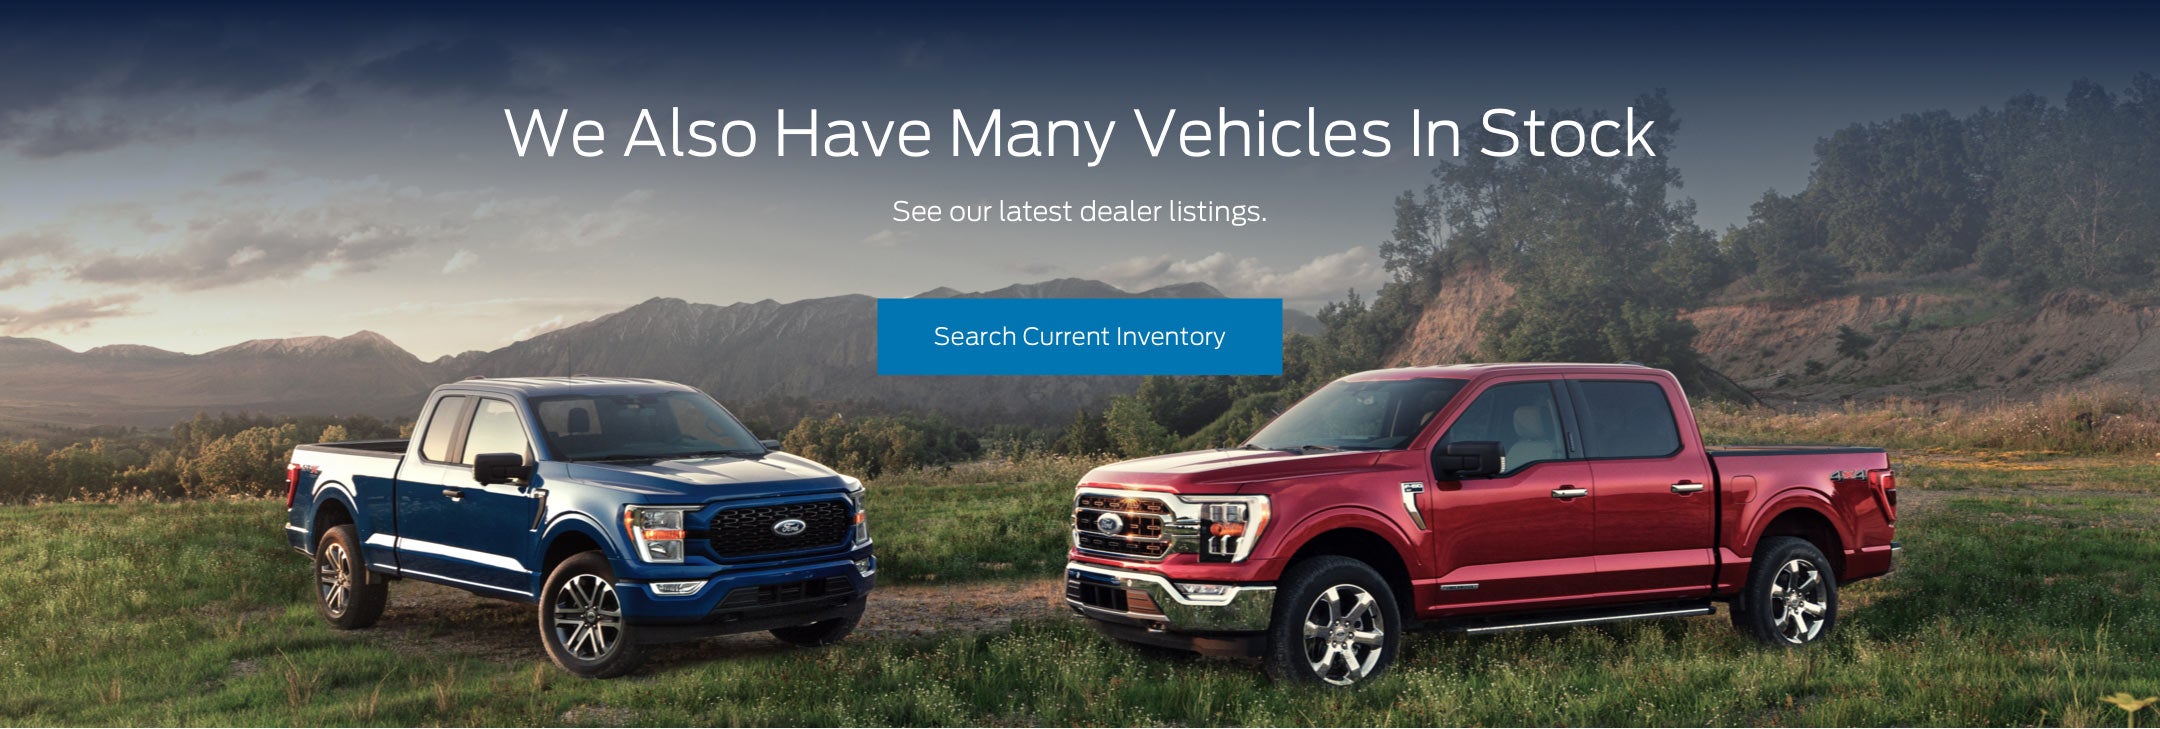 Ford vehicles in stock | Krause Family Ford of Woodstock in Woodstock GA